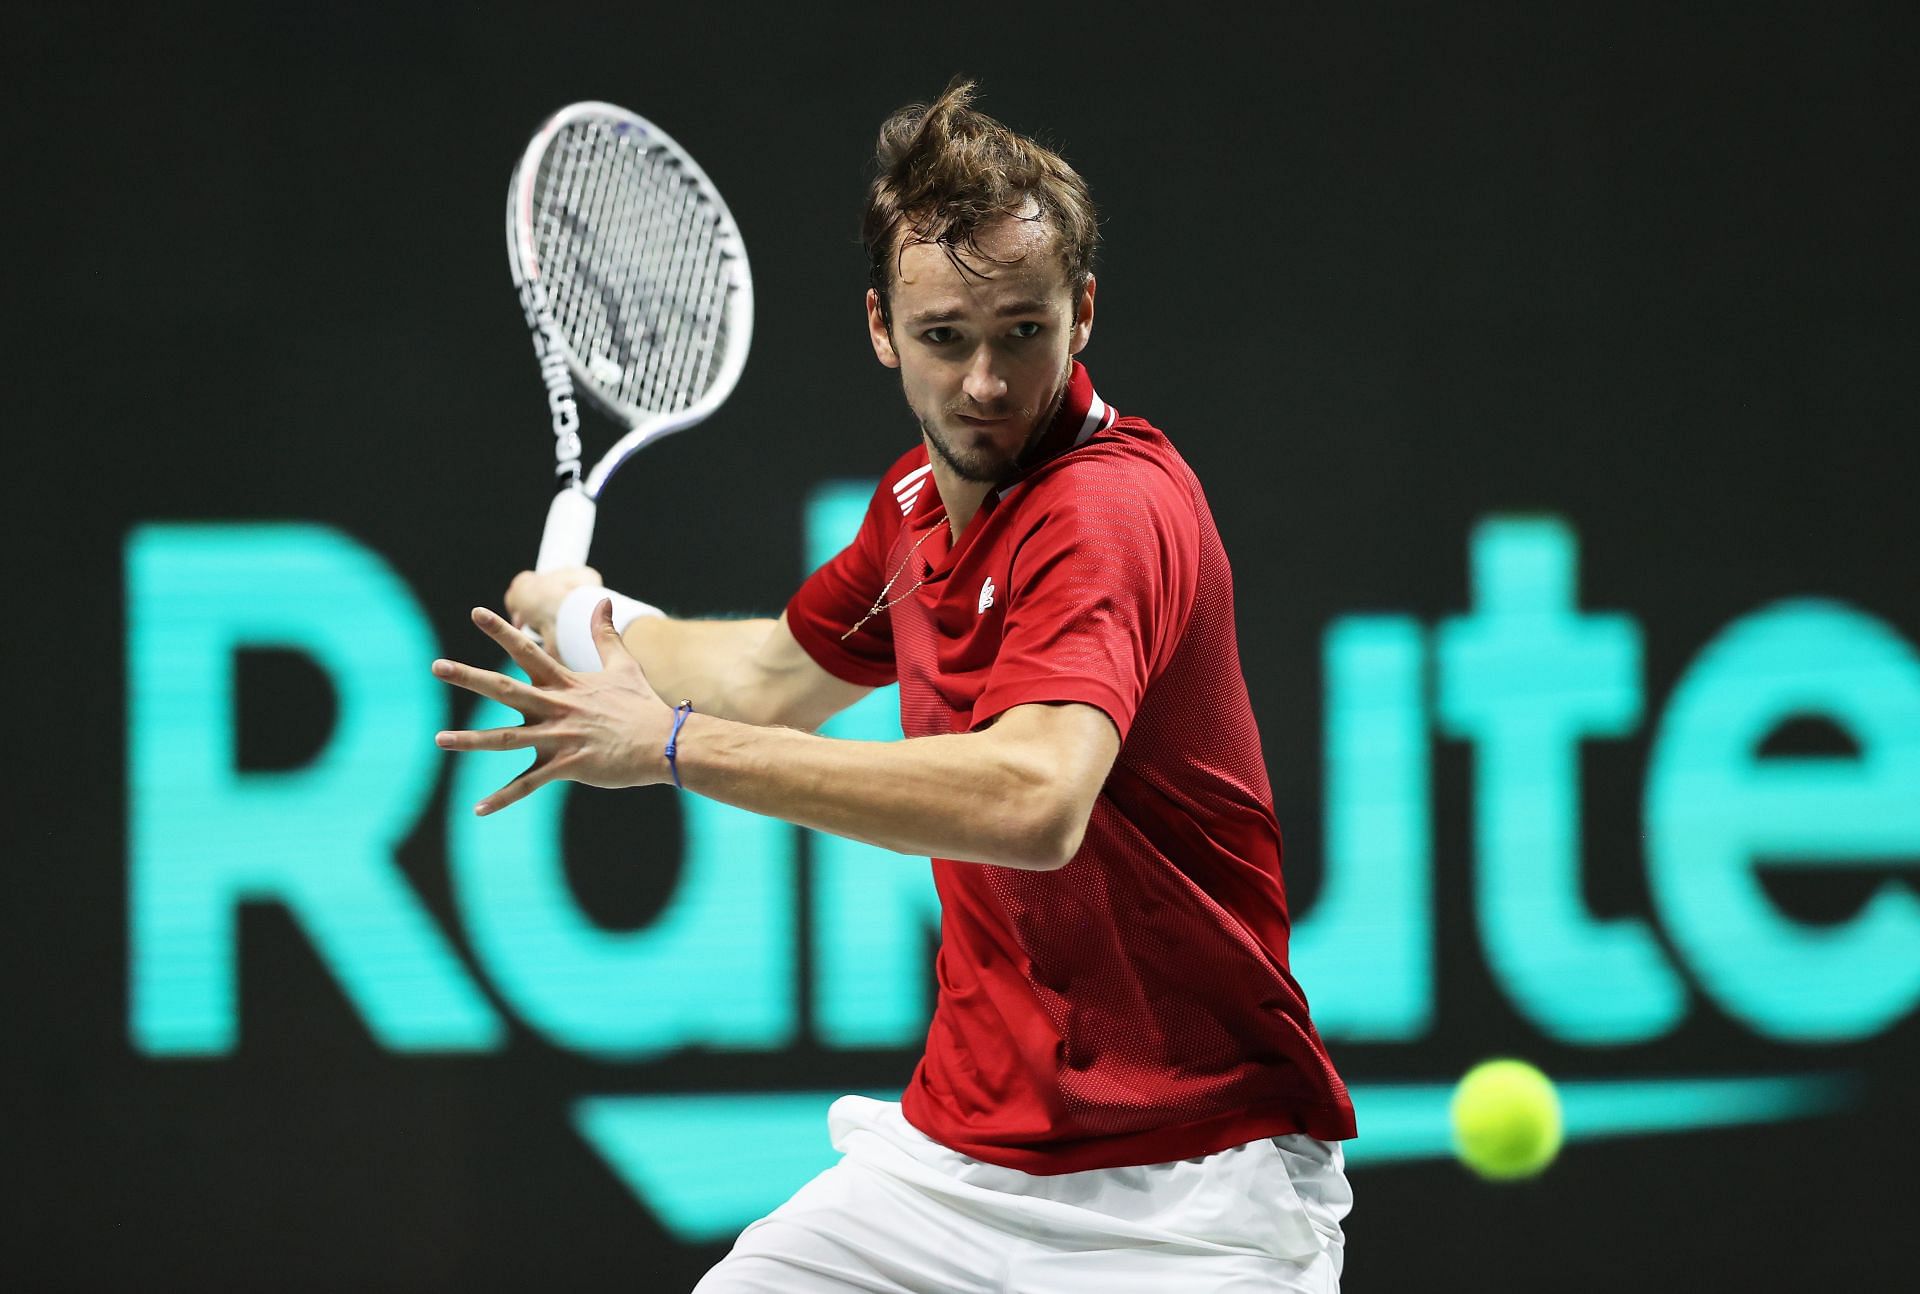 Among other things, Daniil Medvedev will miss out on playing the Davis Cup